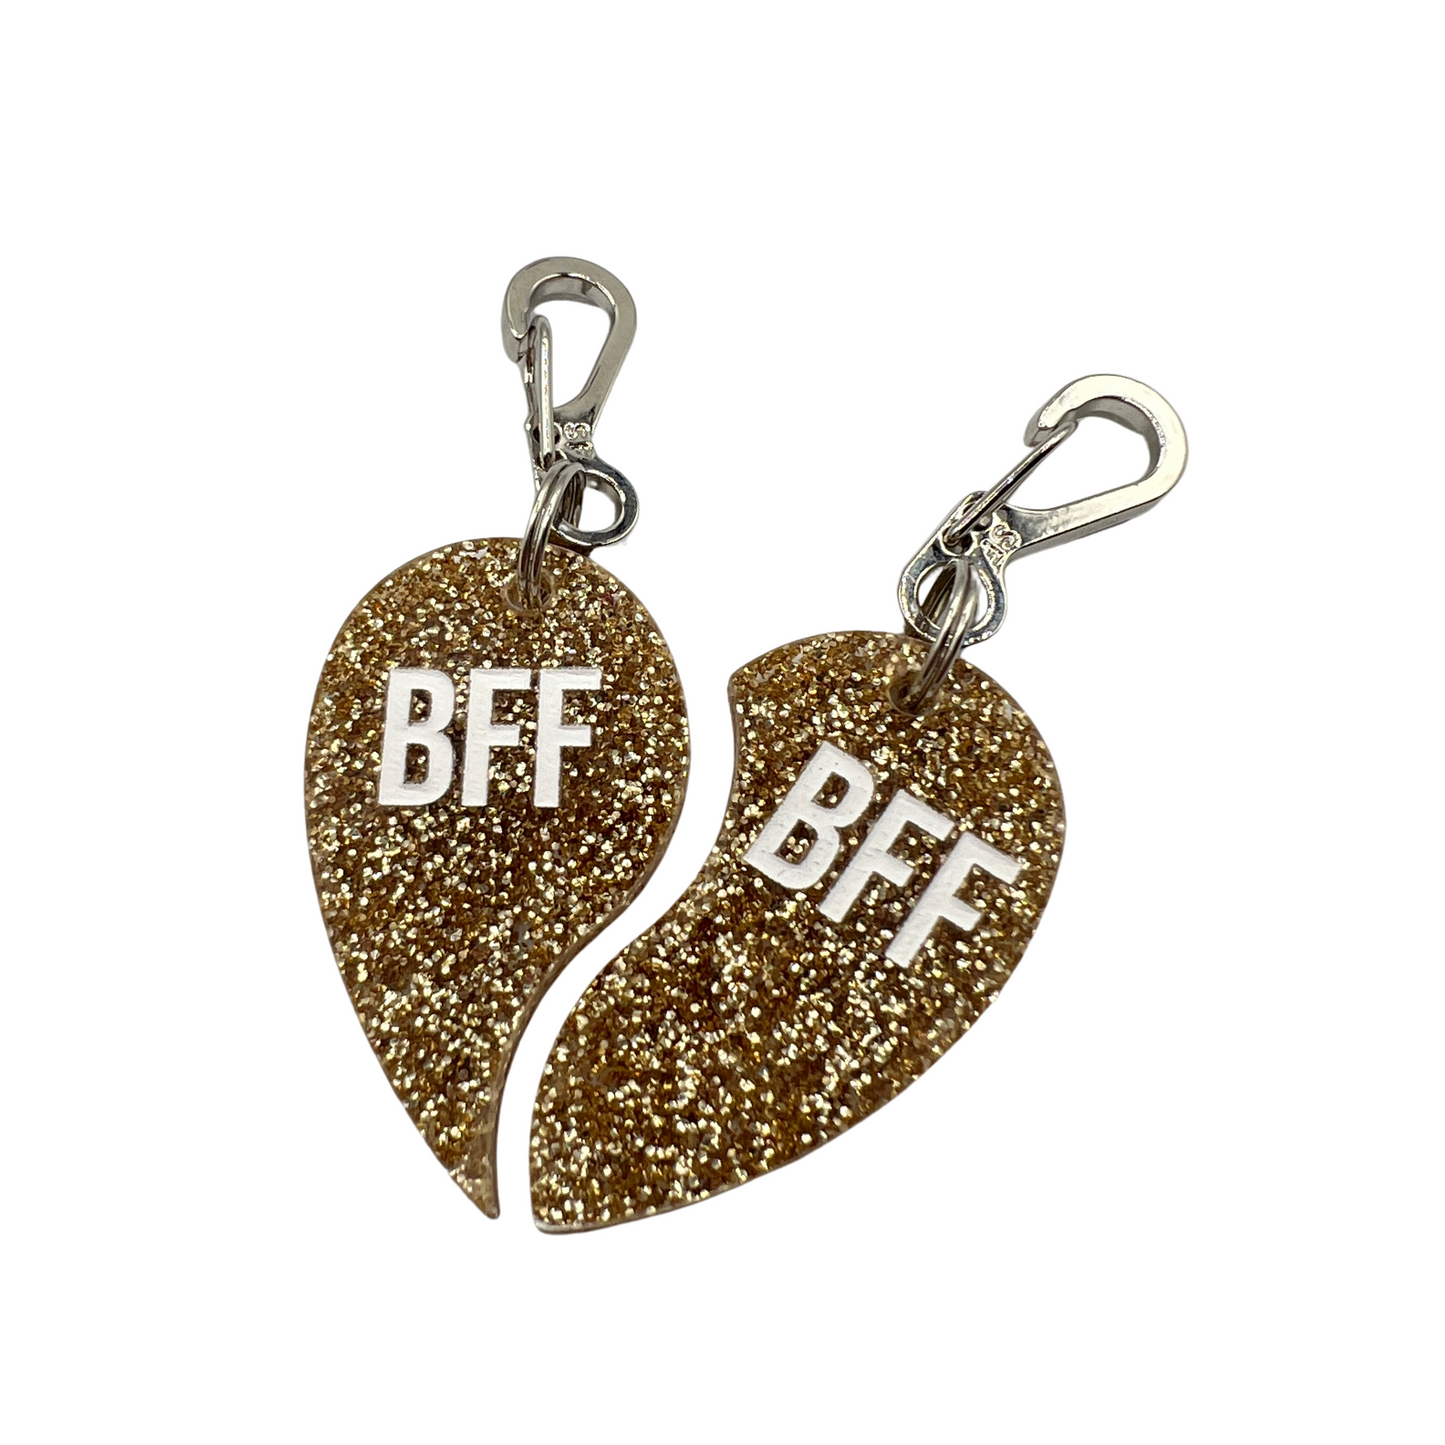 Dog tag "Best Friends Forever"